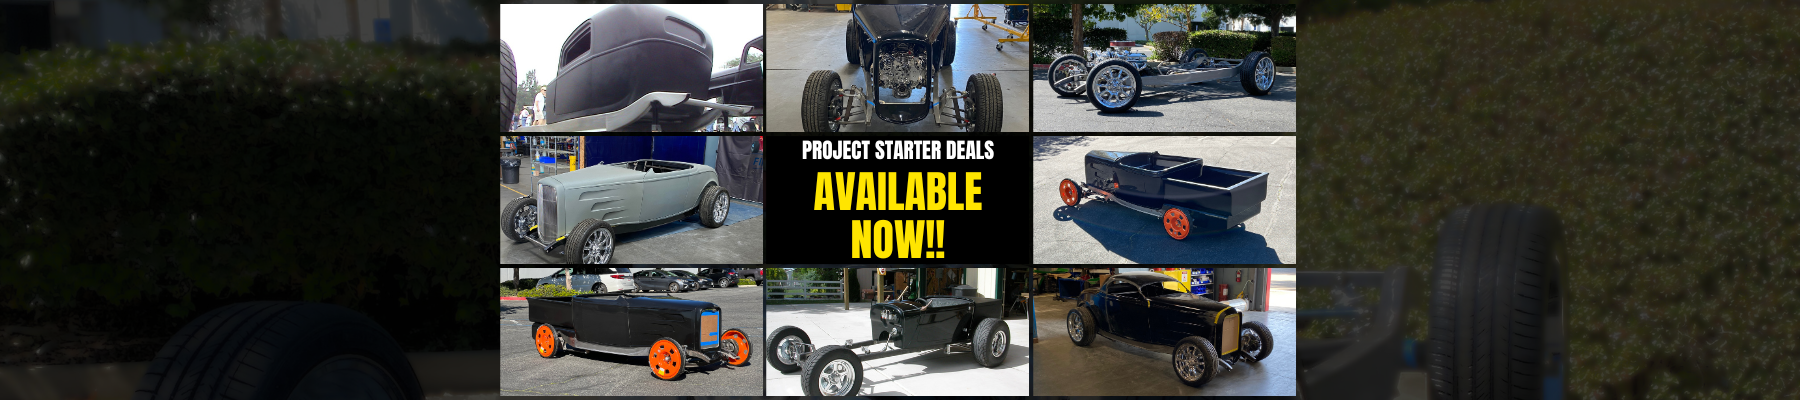 Project Starter Deals Available Now!!